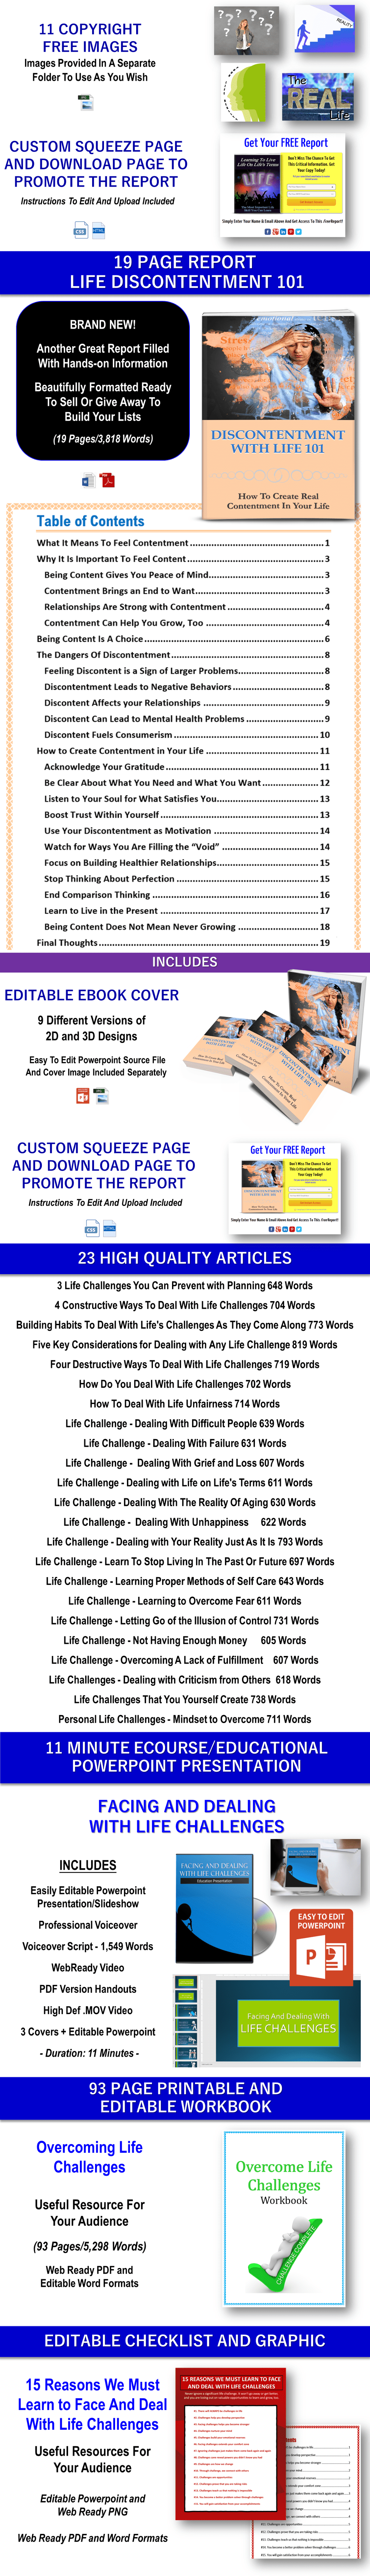 Overcome Life Challenges Reports, Articles PLR